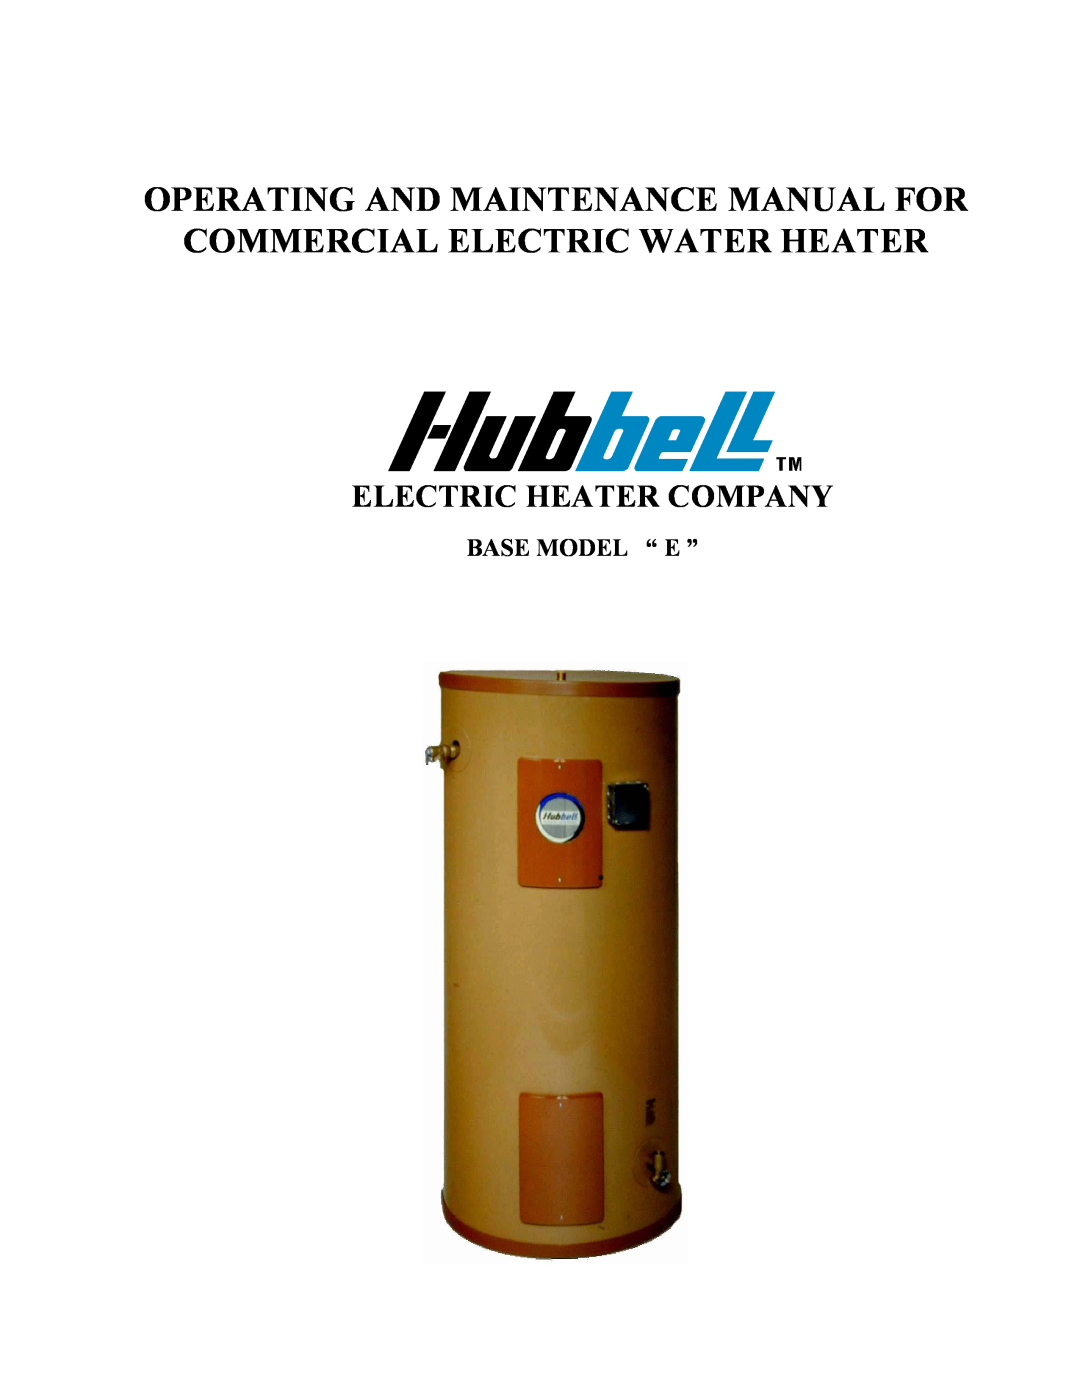 Hubbell Electric Heater Company manual Base Model “ E ”, Operating And Maintenance Manual For, Electric Heater Company 